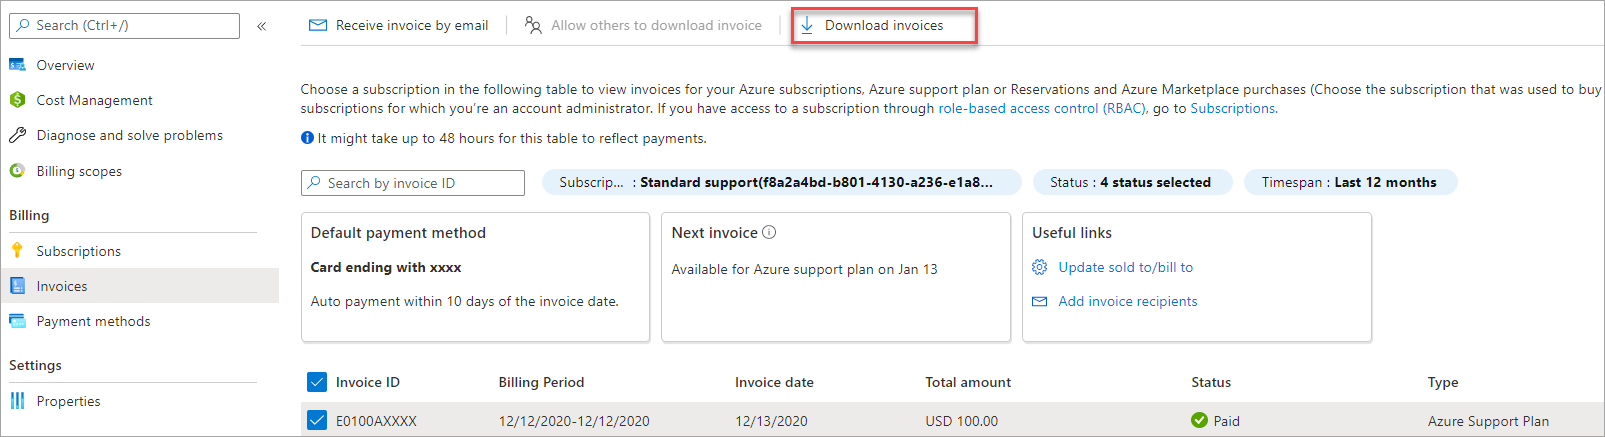 View and download your Azure invoice - Microsoft Cost Management